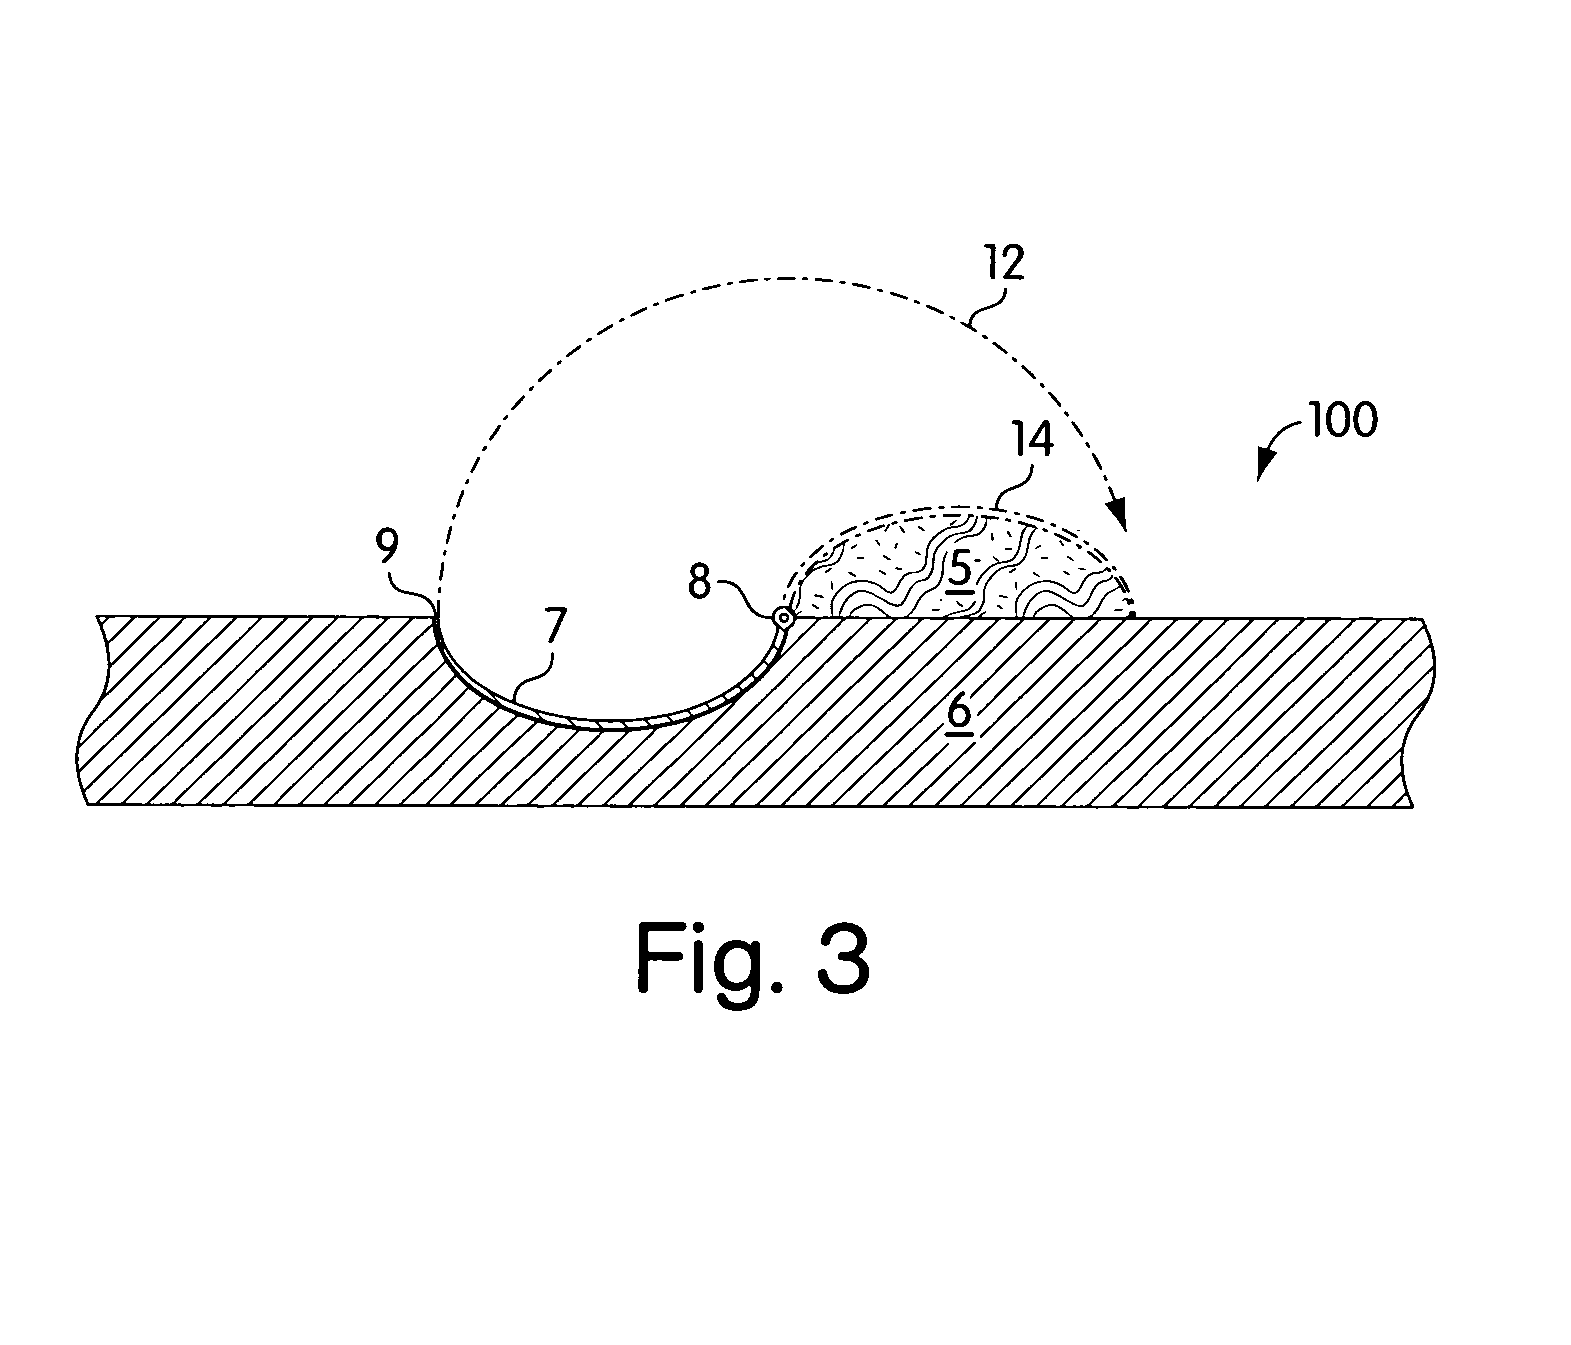 Tissue and fluid sampling device